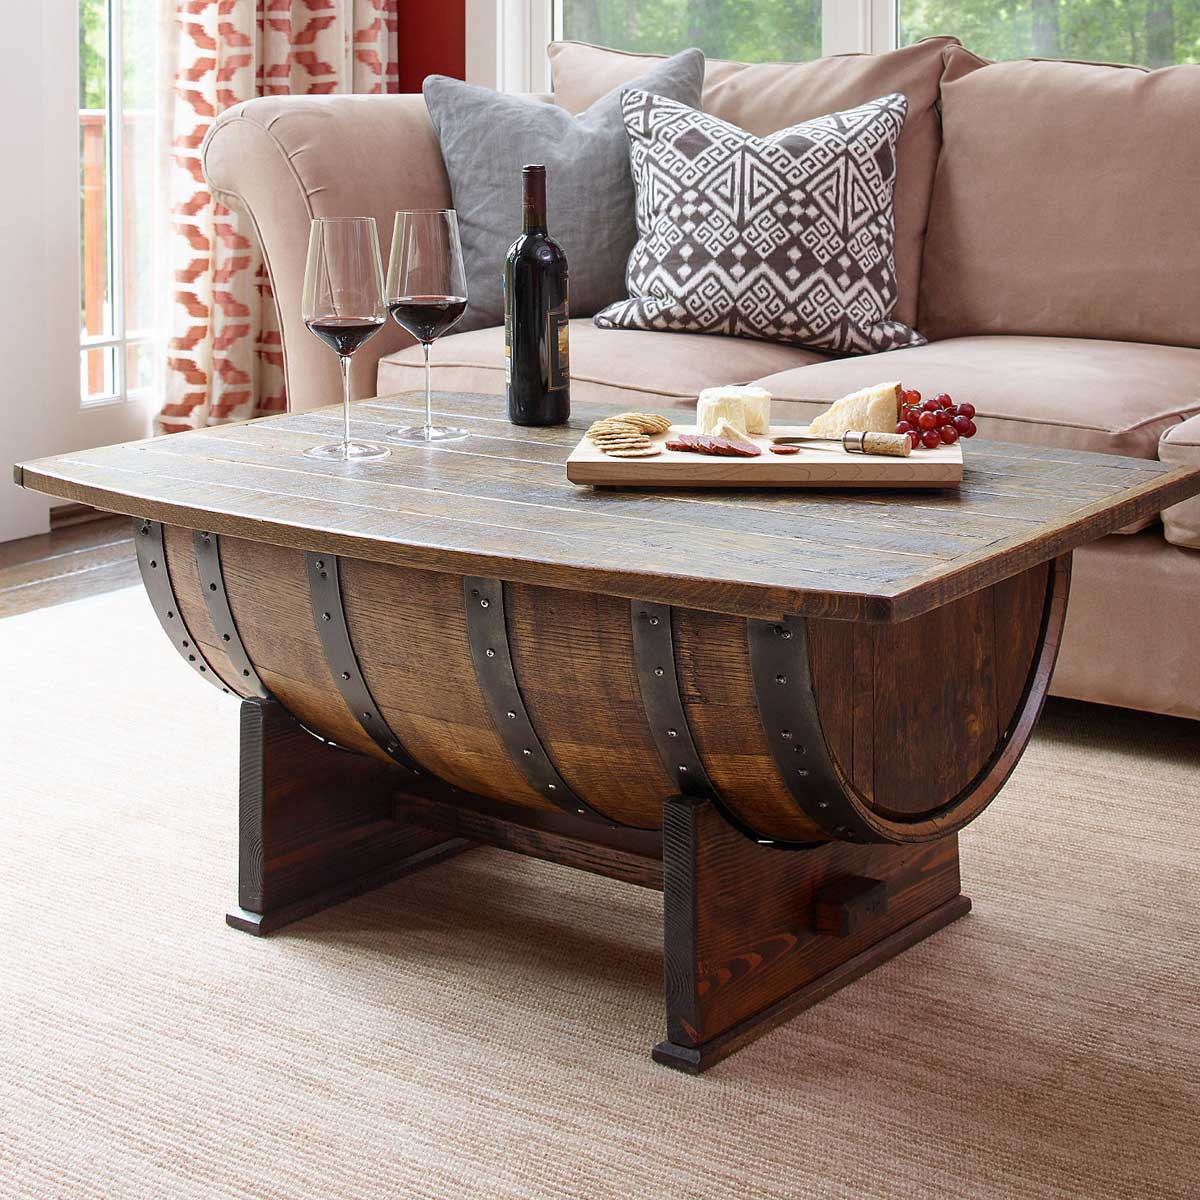 14 Super Cool Homemade Coffee Table Ideas Unusual Coffee Tables within measurements 1200 X 1200